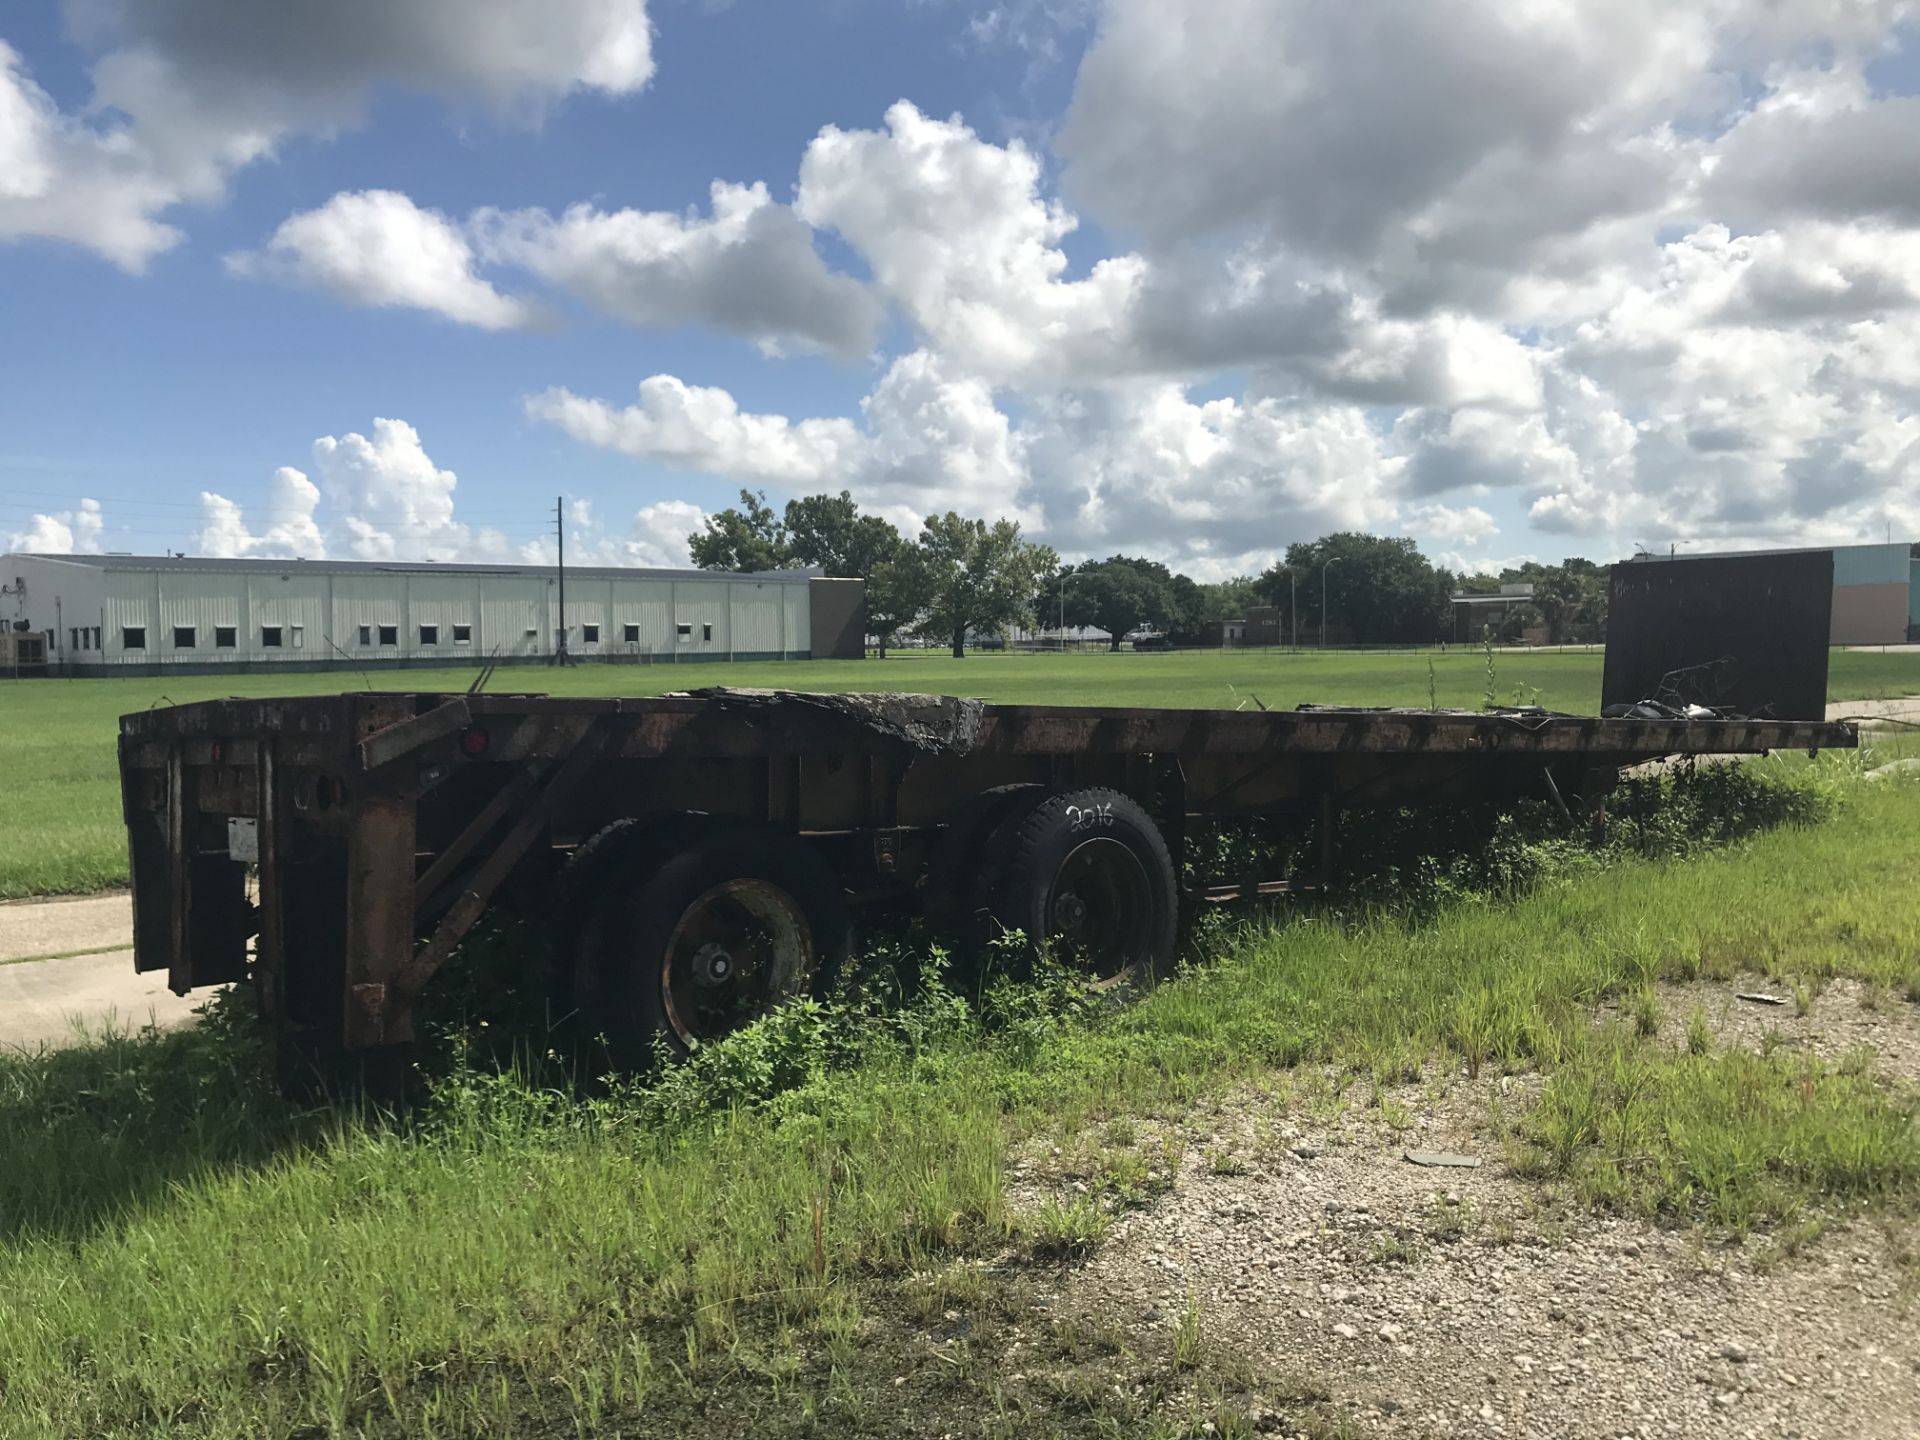 LOW PROFILE TRAILER - APPROXIMATELY 48' - #0257385 (LOCATED IN NEW ORLEANS, LA)